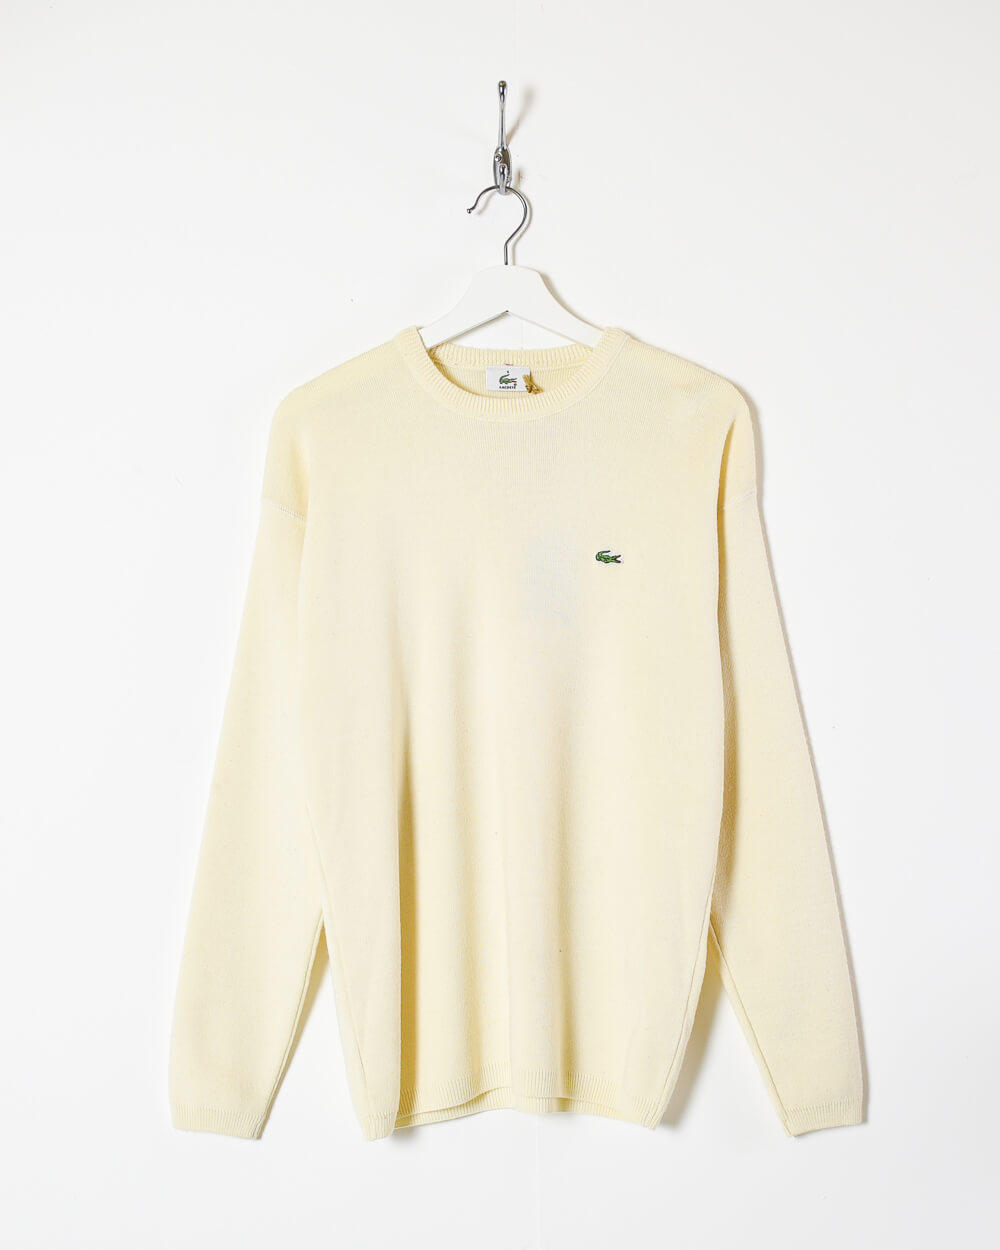 Neutral Lacoste Knitted Sweatshirt - Small